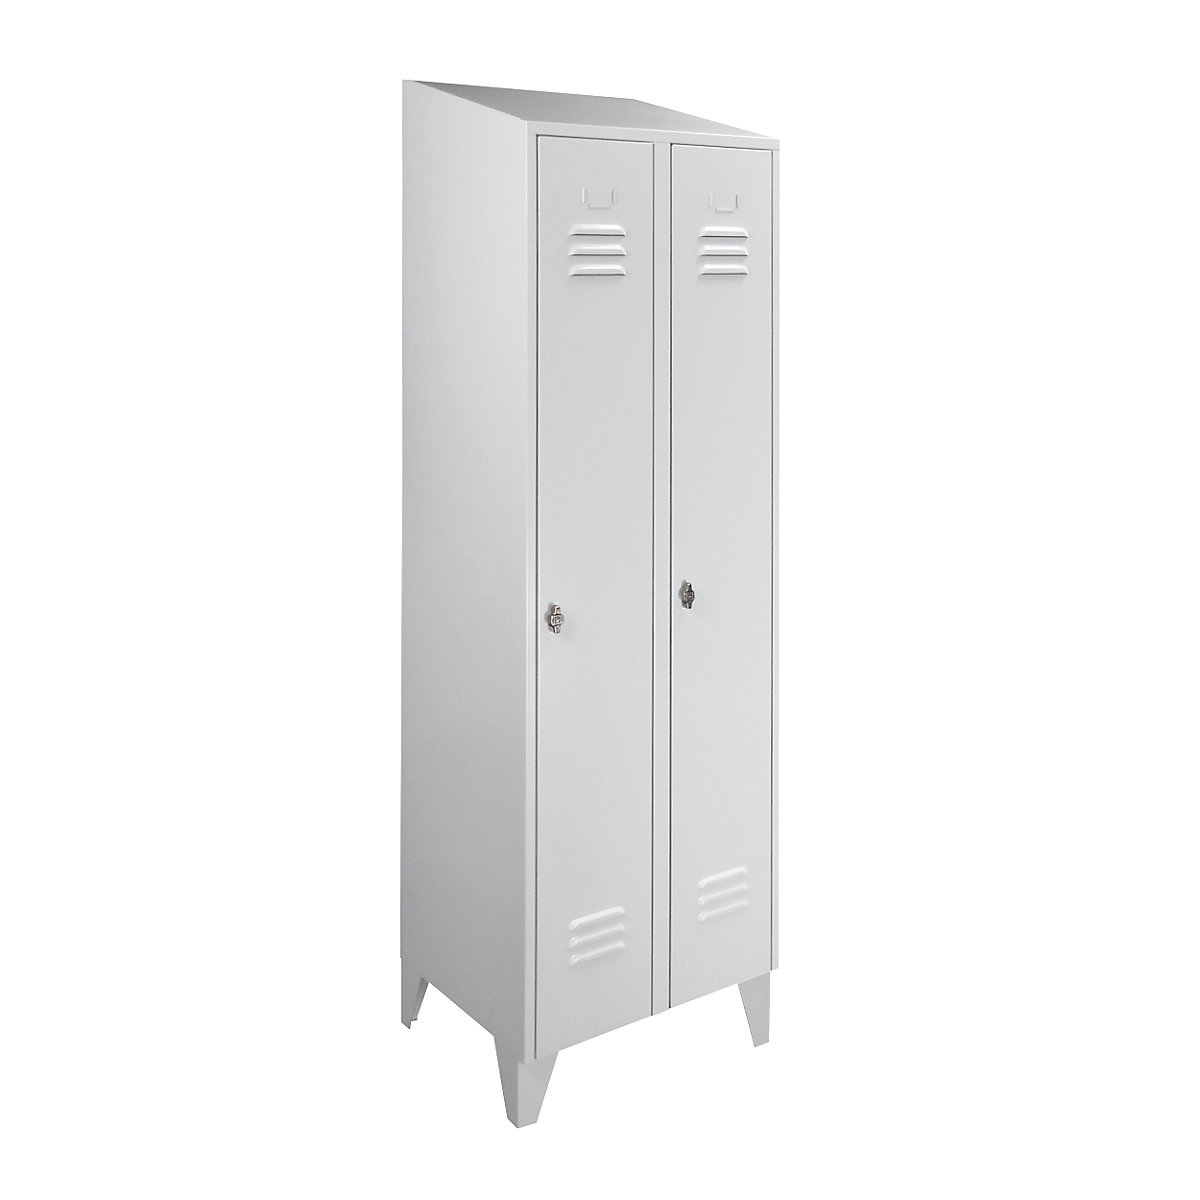 Steel cupboard with sloping top, full height compartments – Wolf, total width 600 mm, 2 compartments, light grey RAL 7035-3